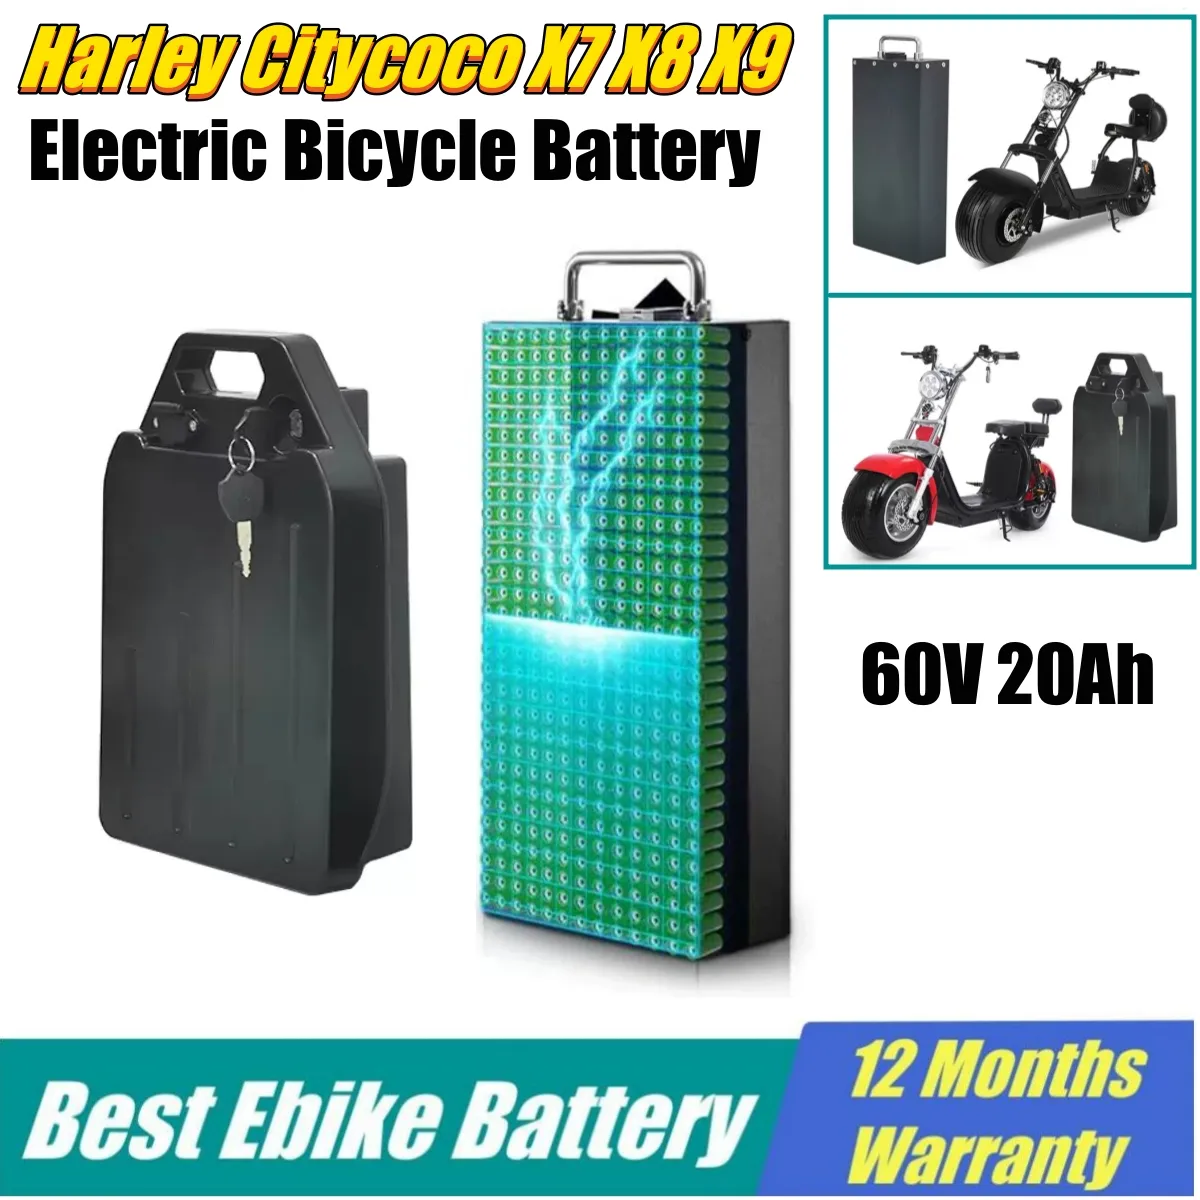 18650 LI-ion Battery Pack 60v 20ah 25.6ah 28ah 72v 19.2ah 21ah 1800W BMS for Electric Harley Citycoco X7 X8 X9 Scooter Bicycle